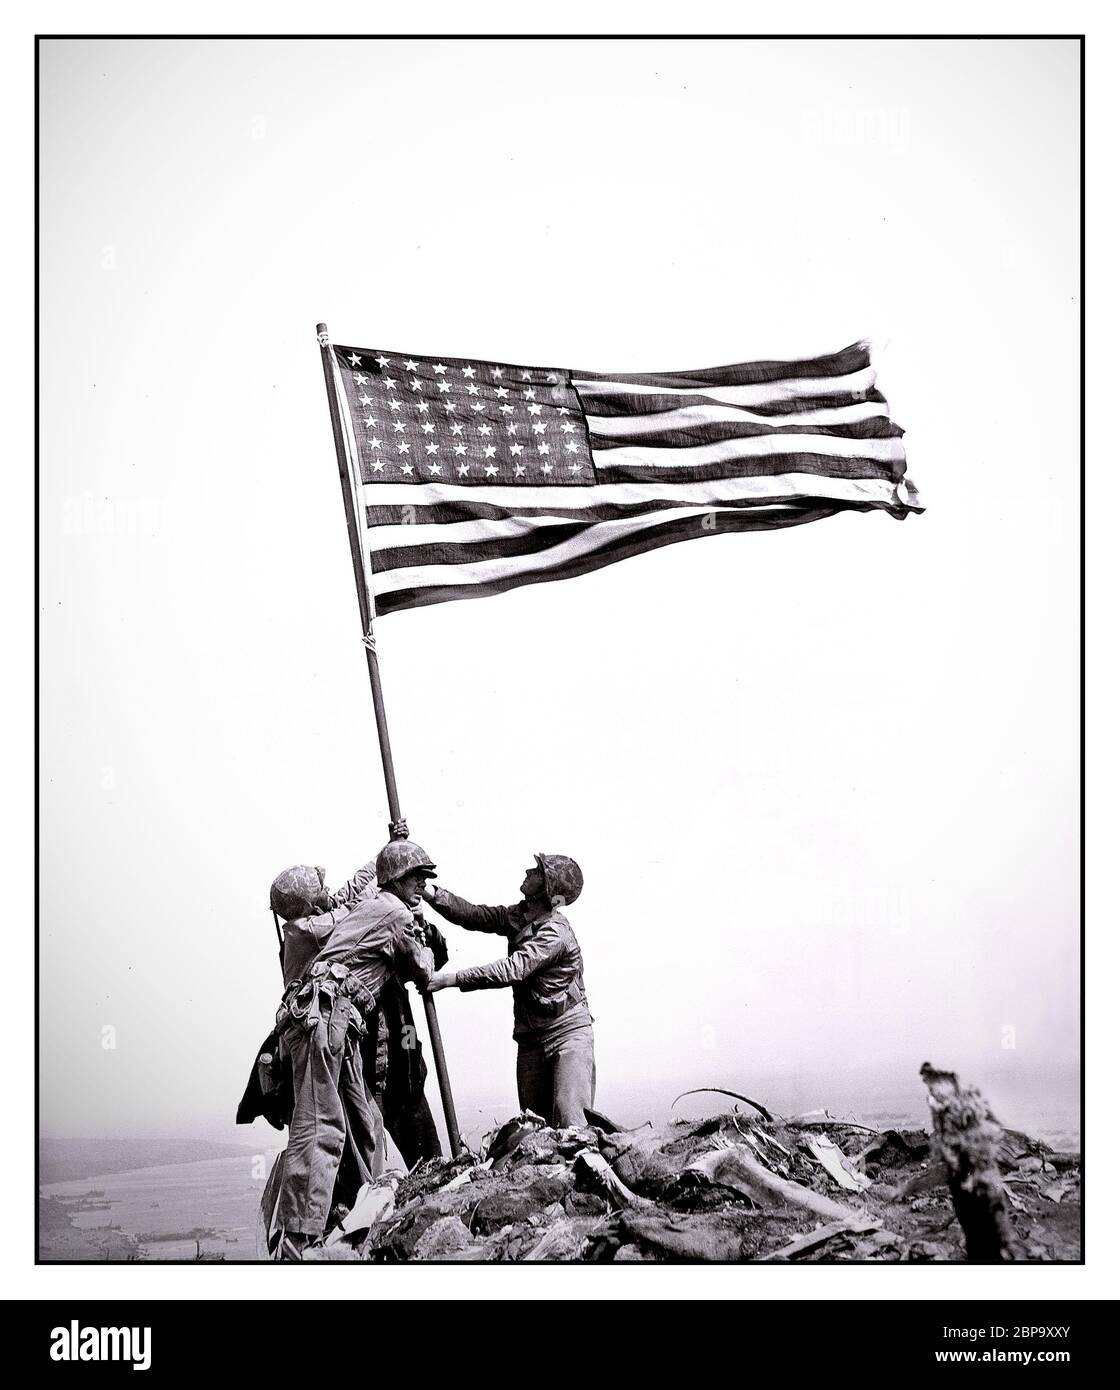 IWO JIMA FLAG RAISING U.S. Marines of the 28th Regiment of the Fifth Division raise the American flag after capturing the 550-foot Mt. Suribachi on Iwo Jima, the largest Volcano Islands of Japan, on Feb. 23, 1945 during World War II. Stock Photo